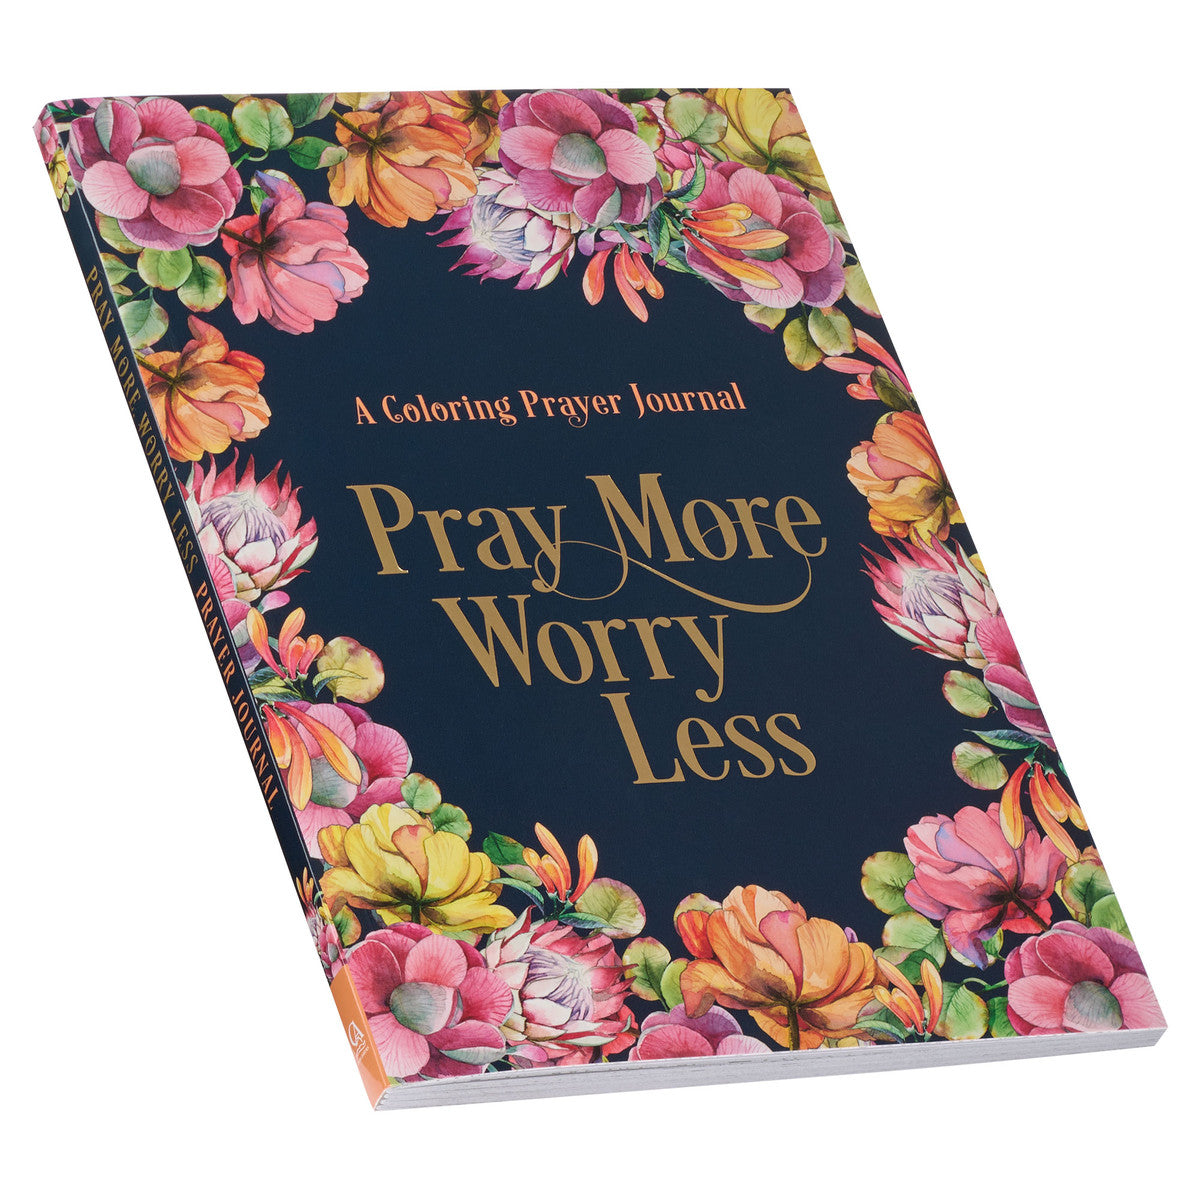 Pray More Worry Less Colouring Prayer Journal - The Christian Gift Company